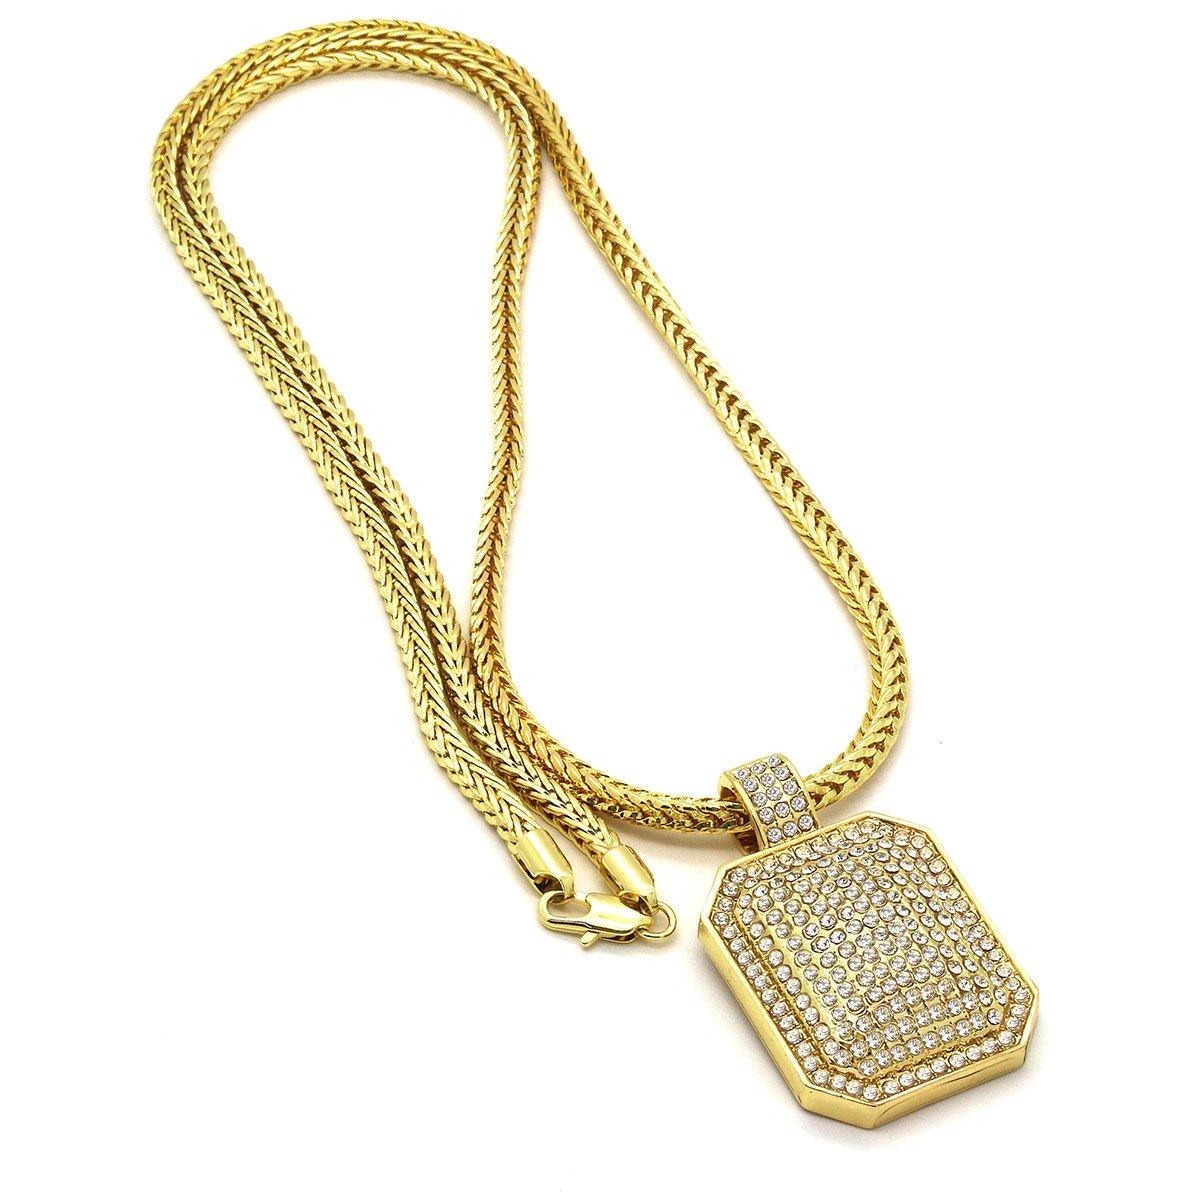 Gold Filled CZ Dog Tag Pendant with Franco Chain